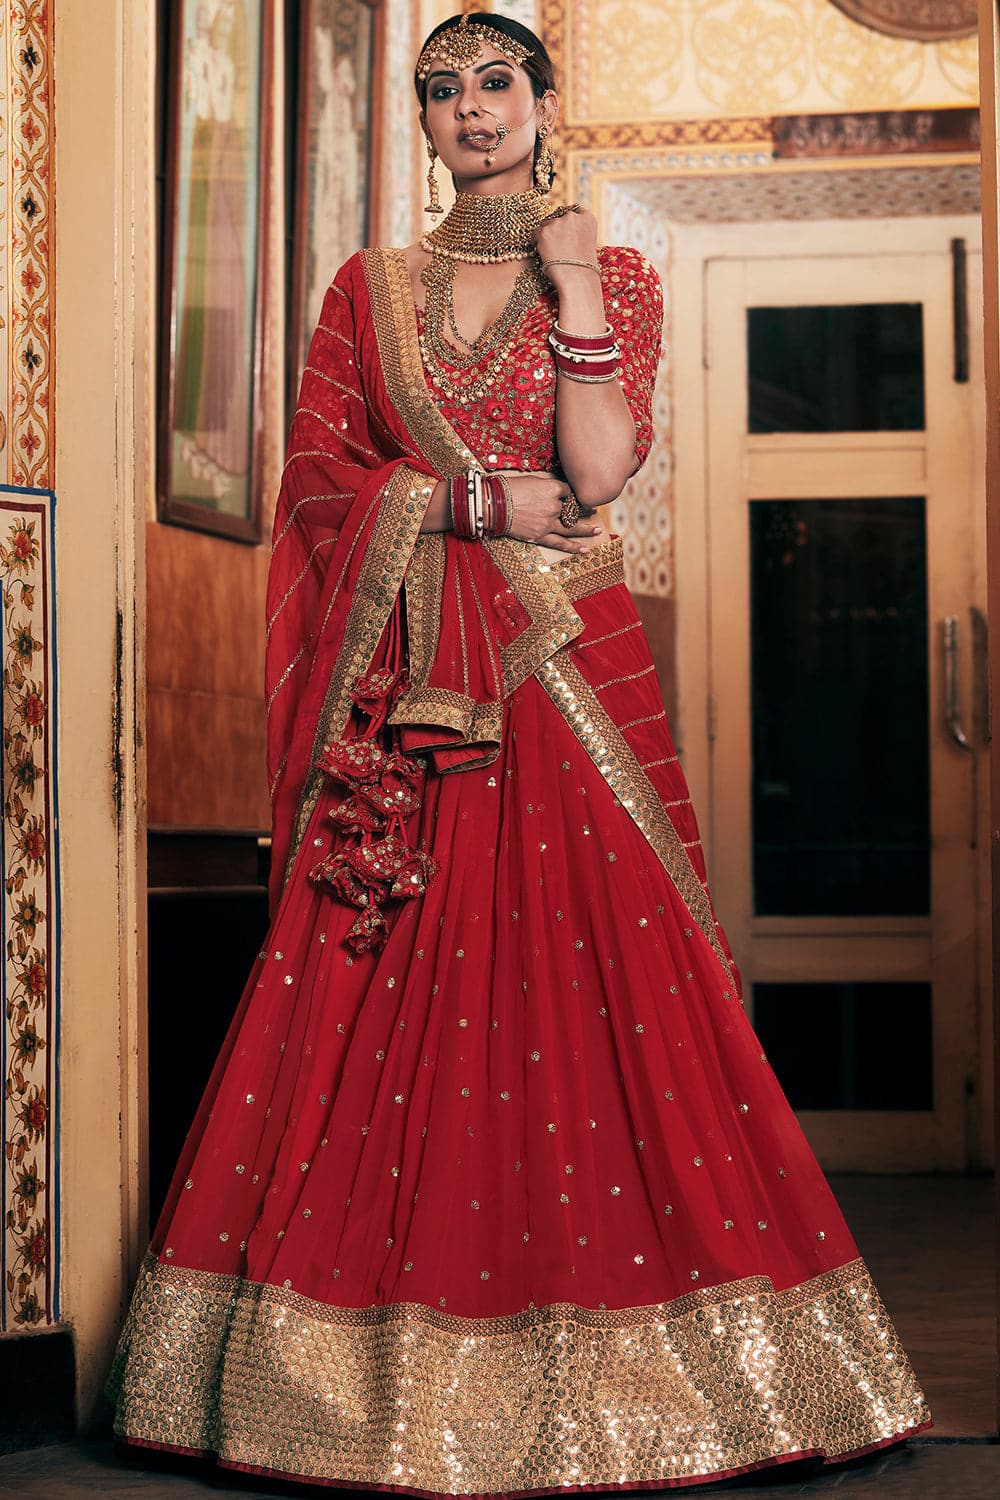 Where to buy Bridal Lehengas in Bangalore - List of Stores